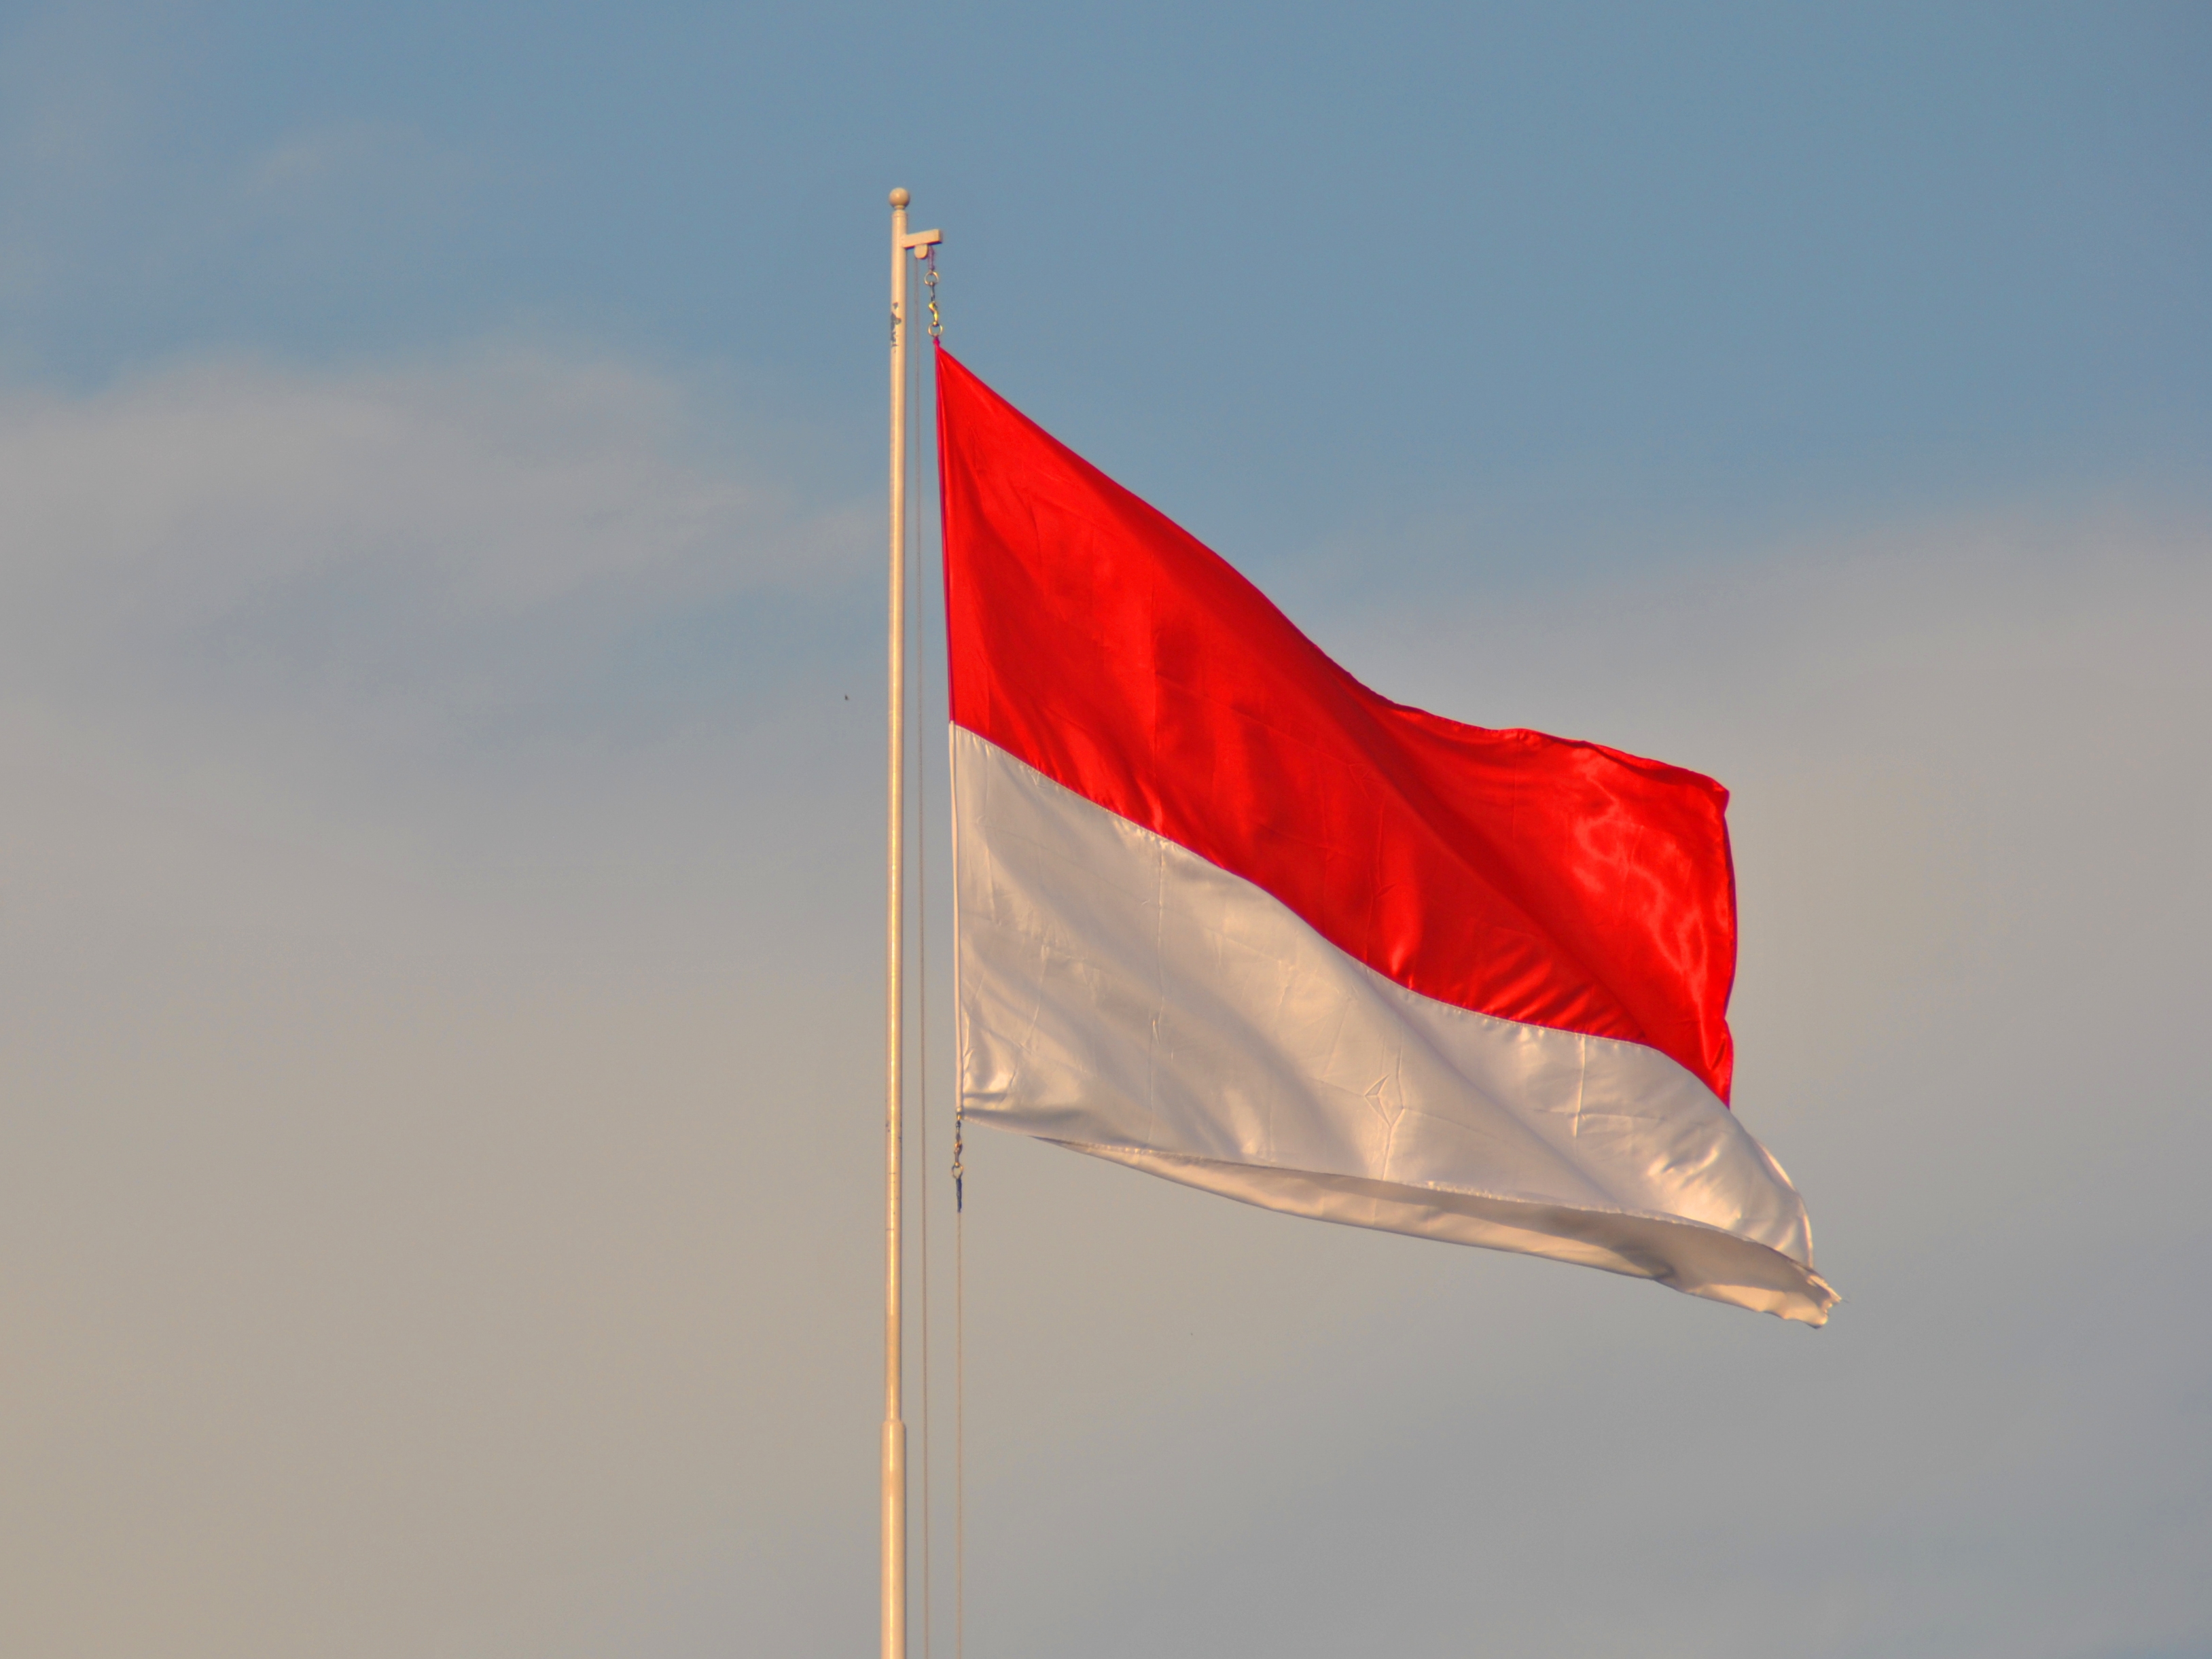 East Ventures closes new $30M fund to continue investing in Indonesia